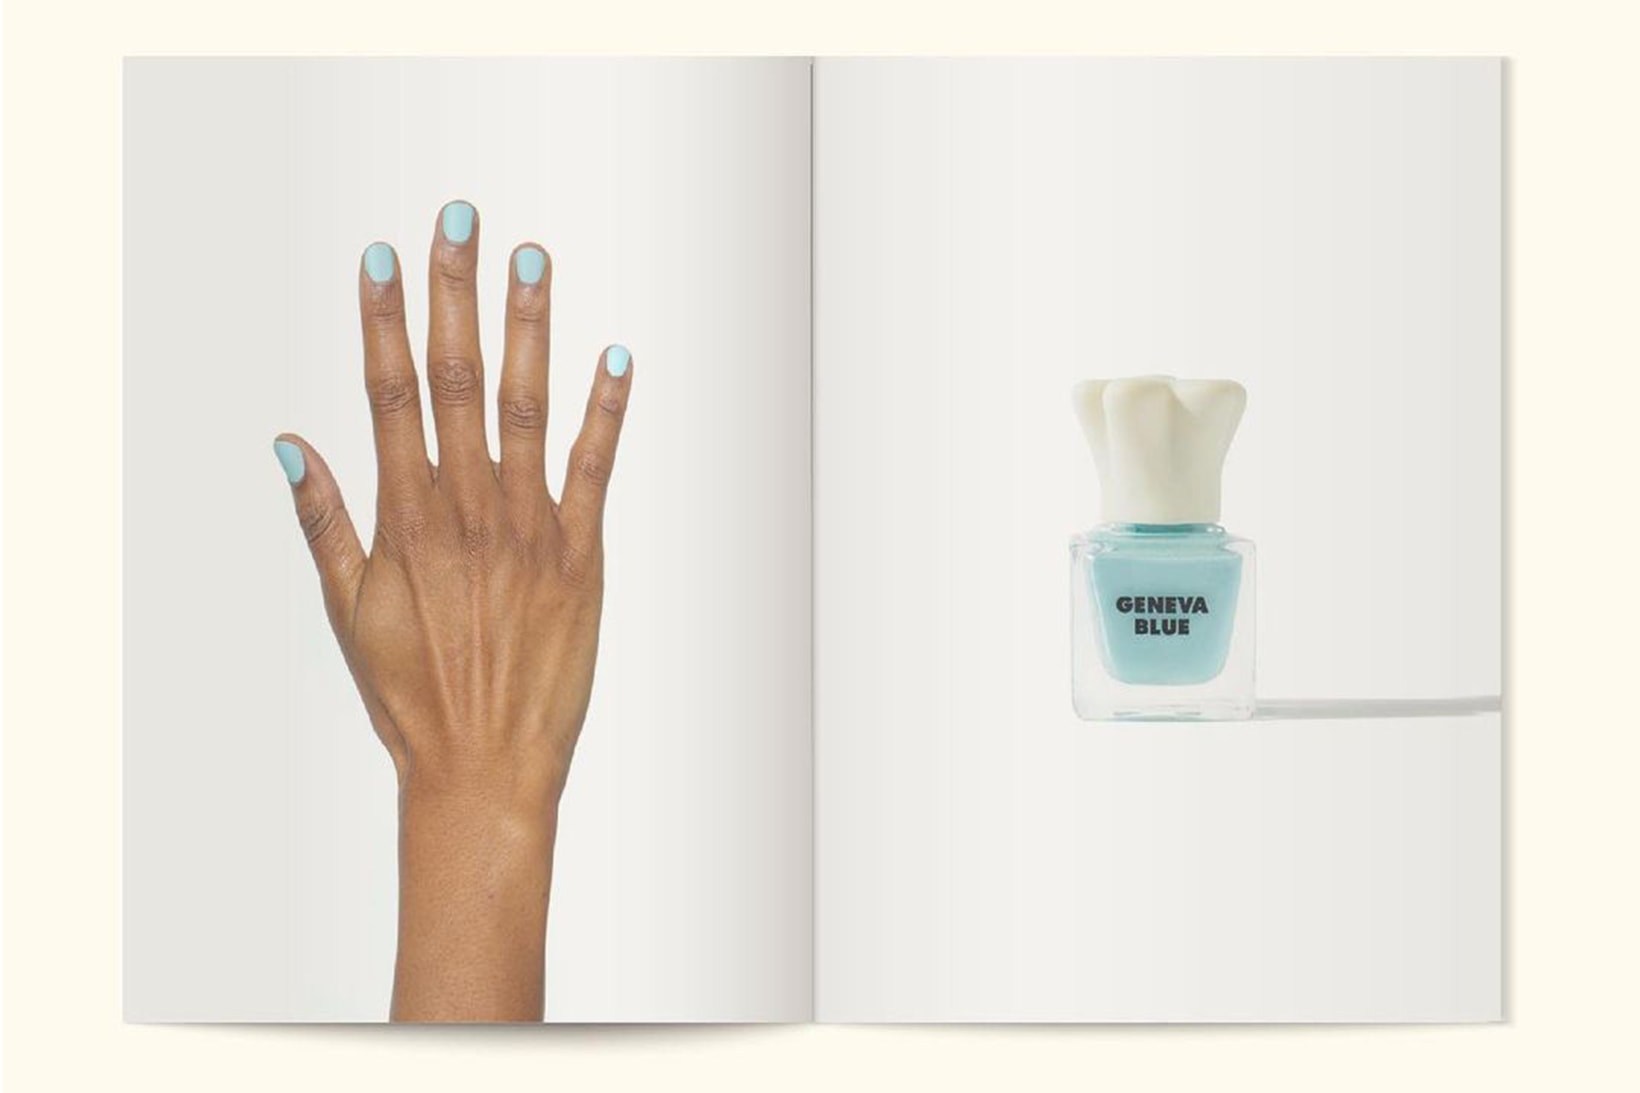 What Inspired Tyler, The Creator to Drop Fragrance and Nail Polish